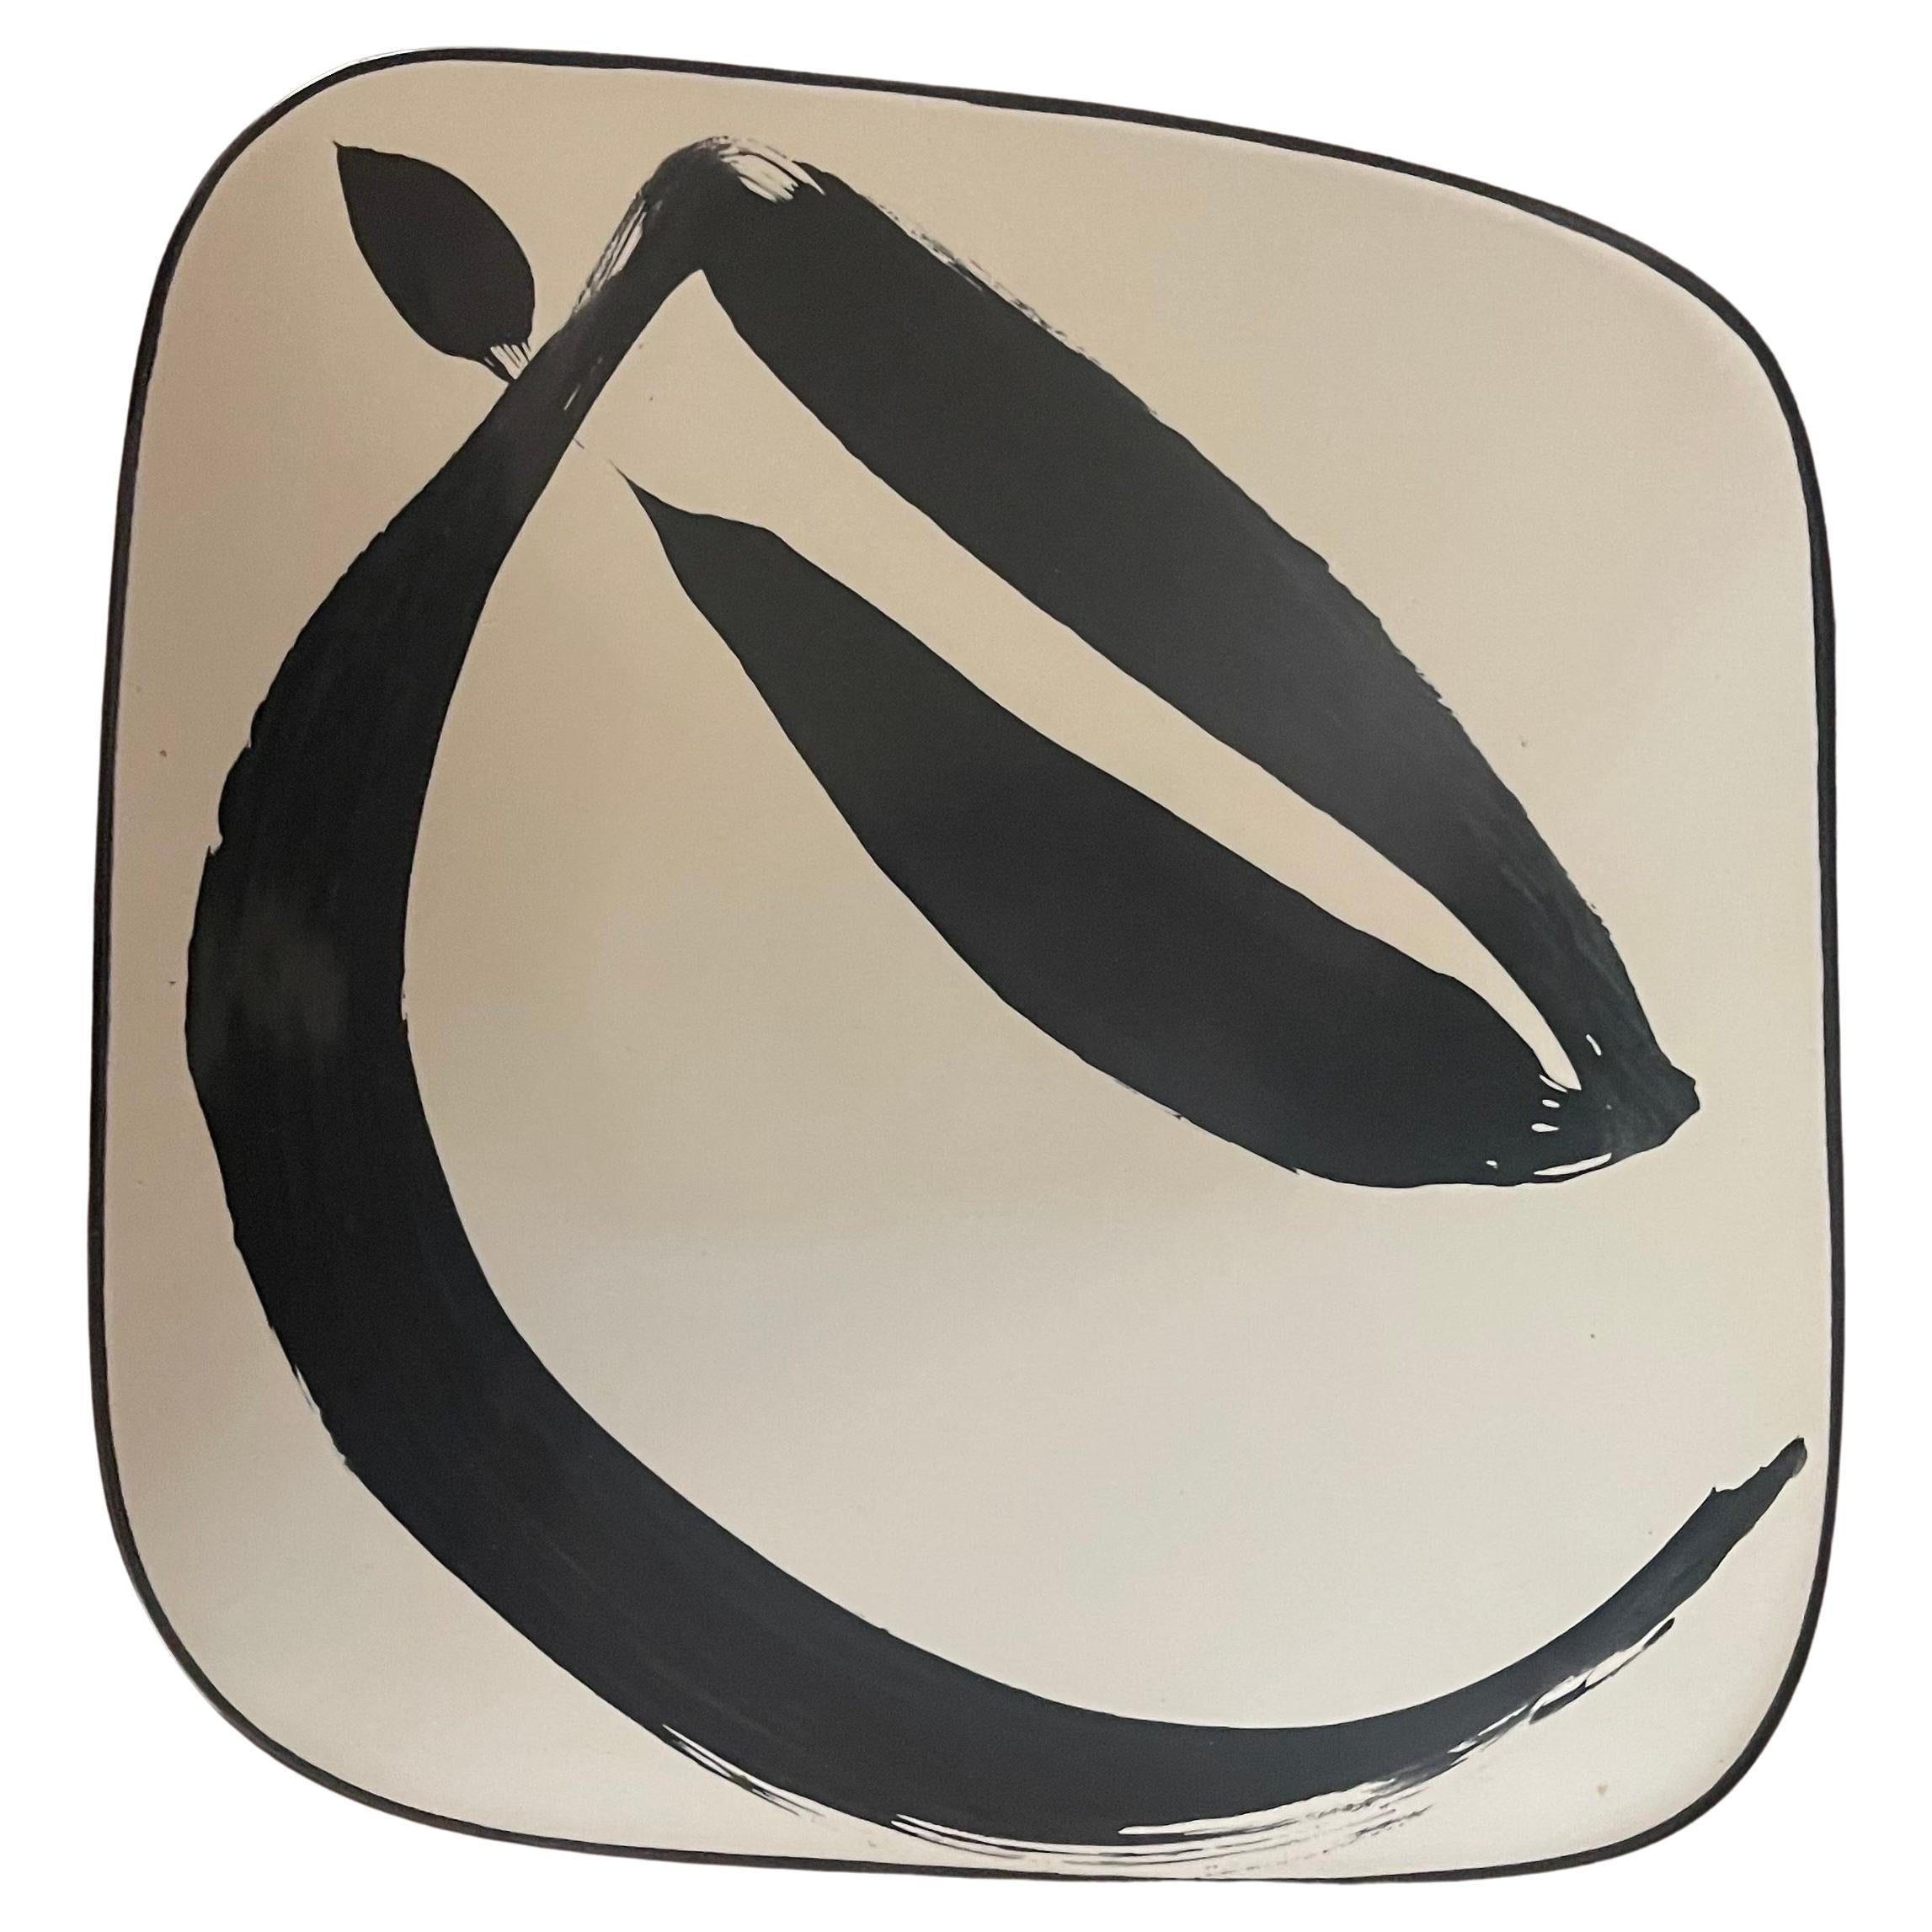 A very attractive post-modern rhombus shaped ceramic bowl by Ann Mallory for Americaware, circa 1990s. Designed by art potter Ann Mallory, this beautiful bowl features a large, gestural pattern hand-painted in the style of Japanese calligraphy.